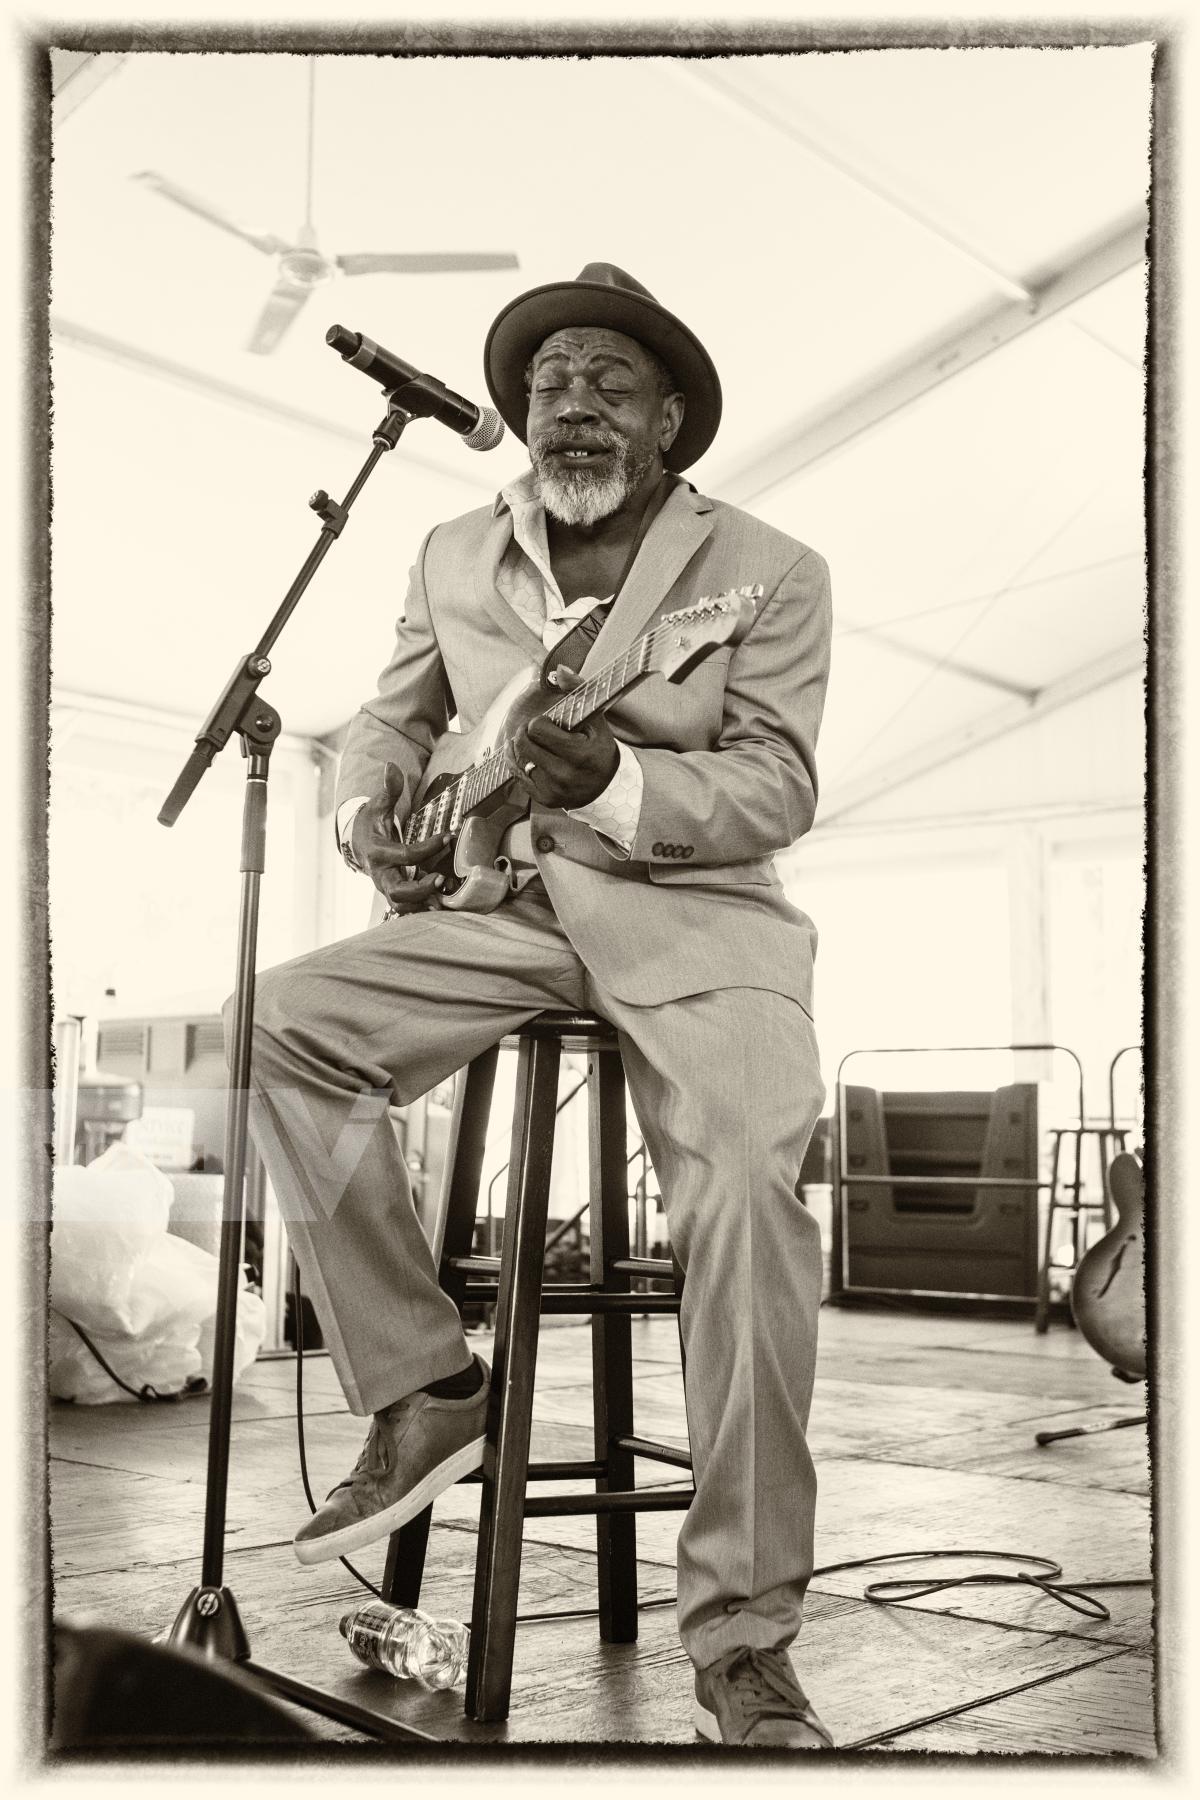 Purchase Lurrie Bell at Chicago Blues Festival by Jean-Marc Giboux